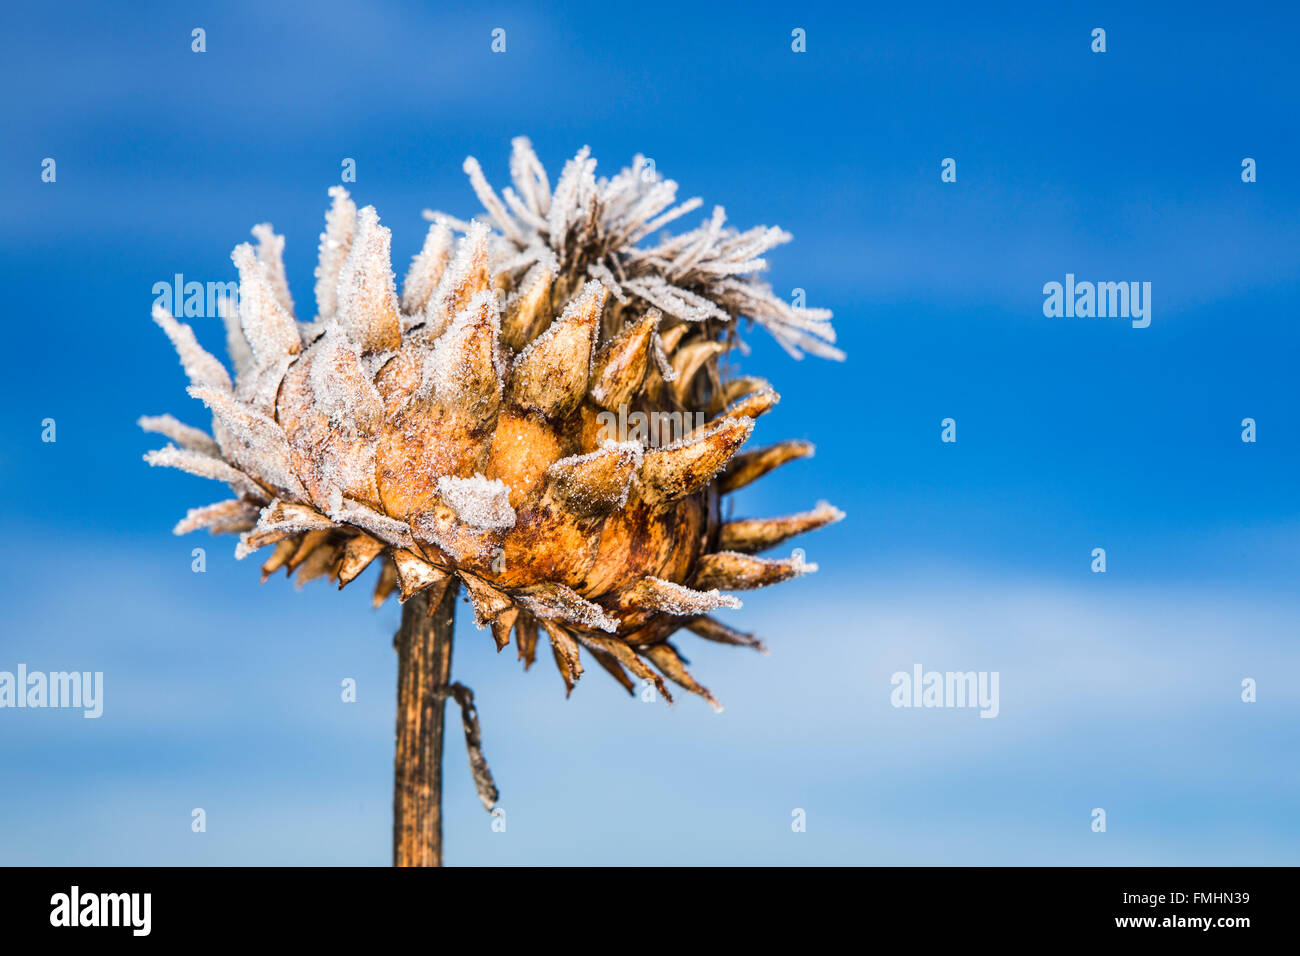 Dead head of a cardoon against a blue sky and covered in winter frost. Stock Photo